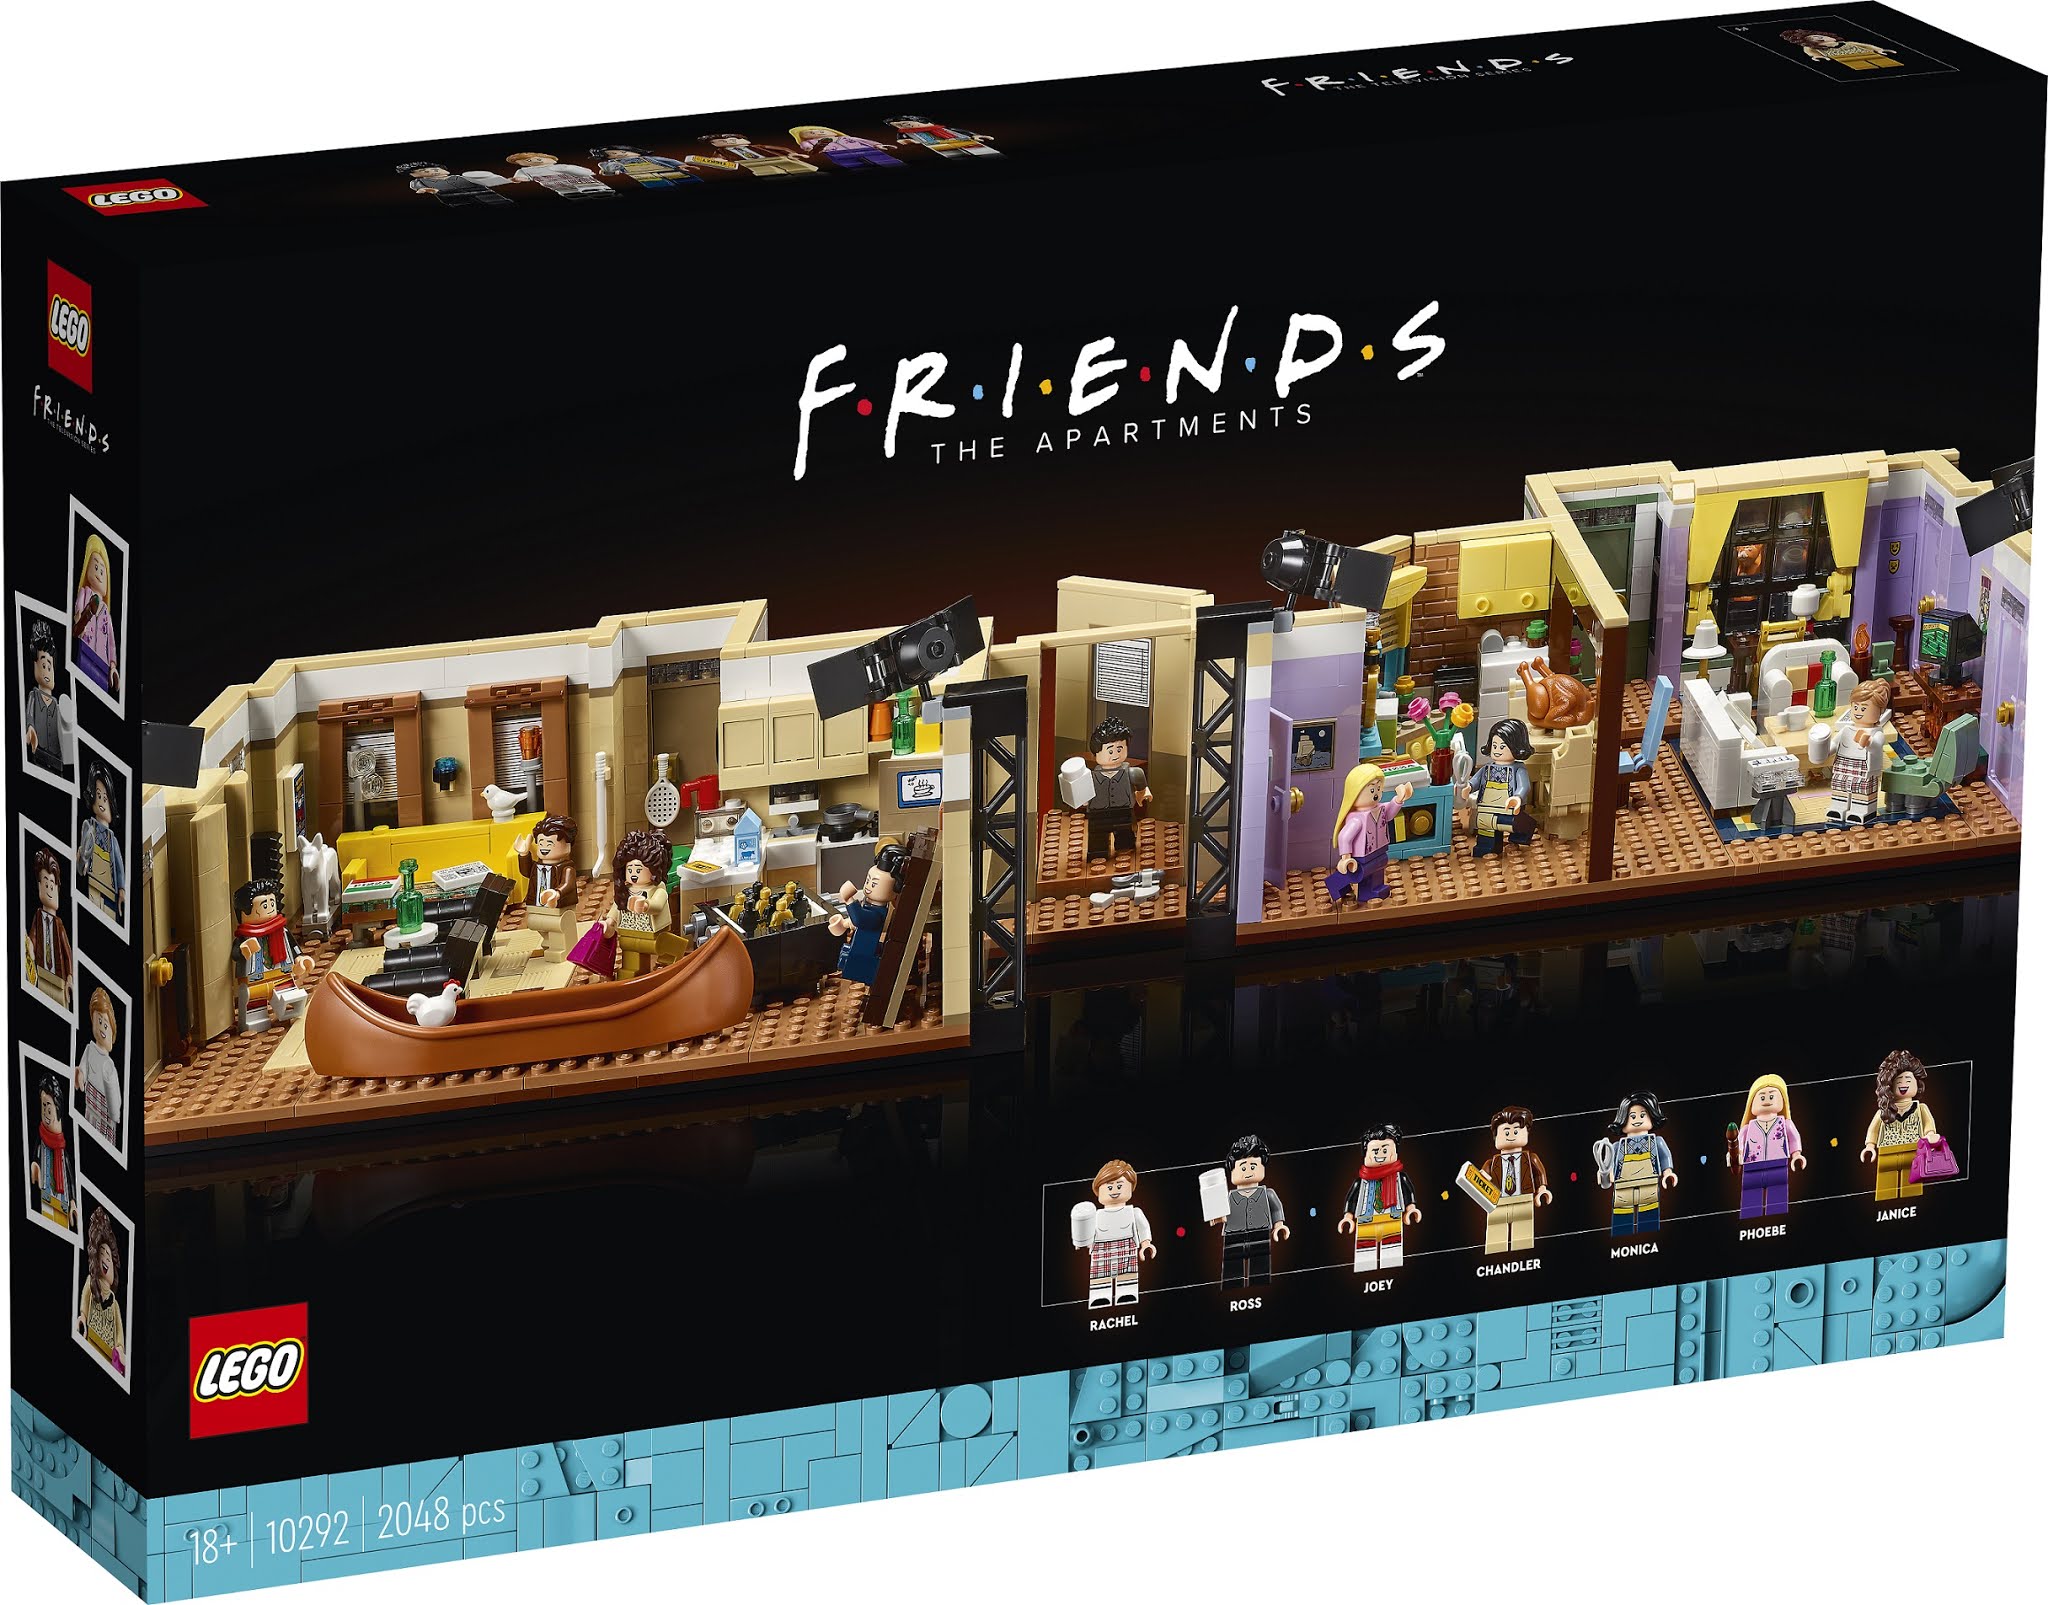 LEGO F.R.I.E.N.D.S Apartments Set complete with iconic features and props